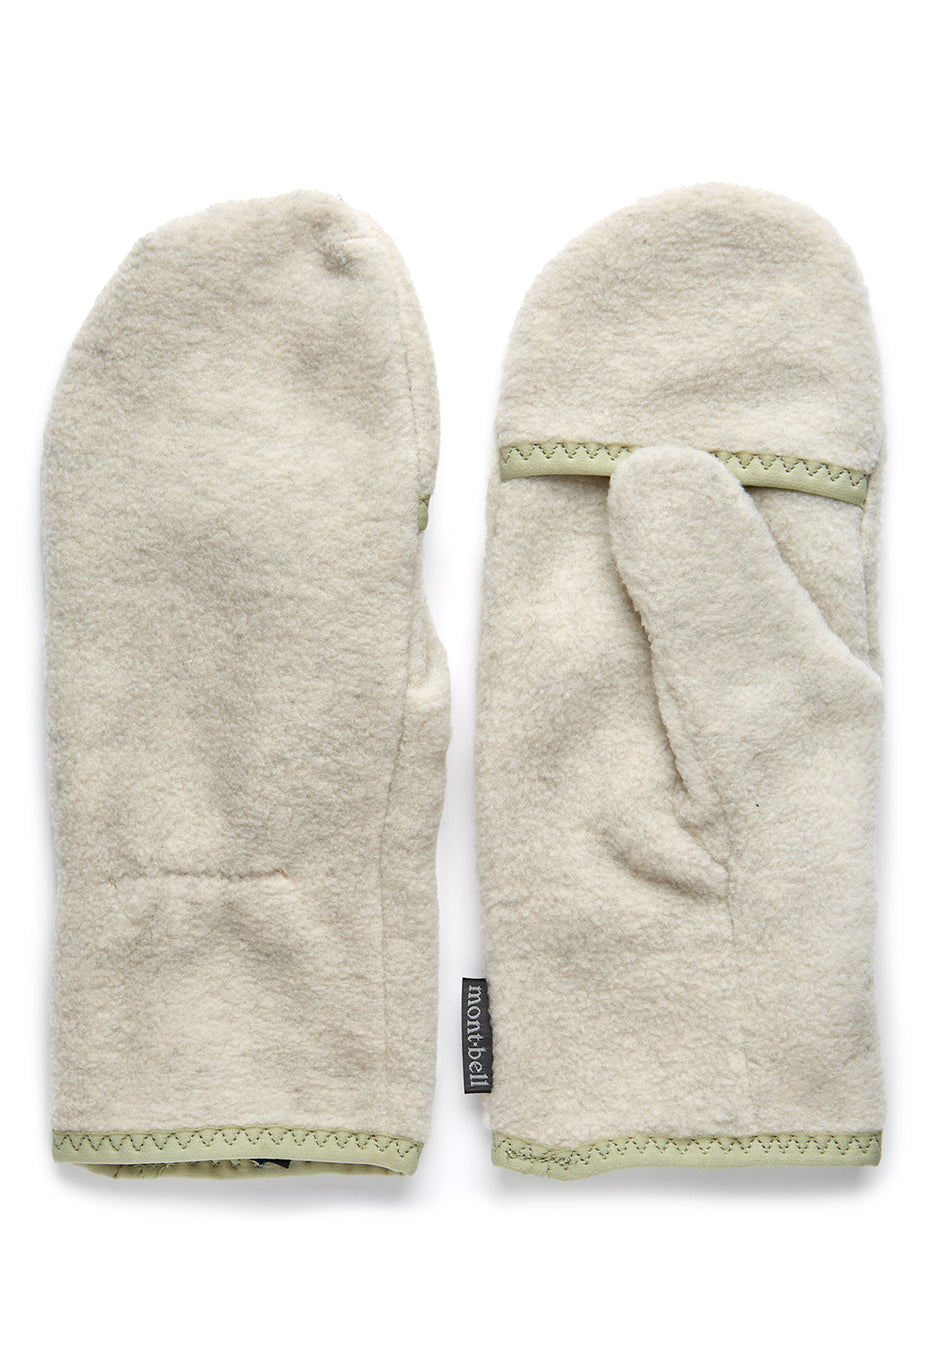 Montbell Climaplus 200 Mittens 4